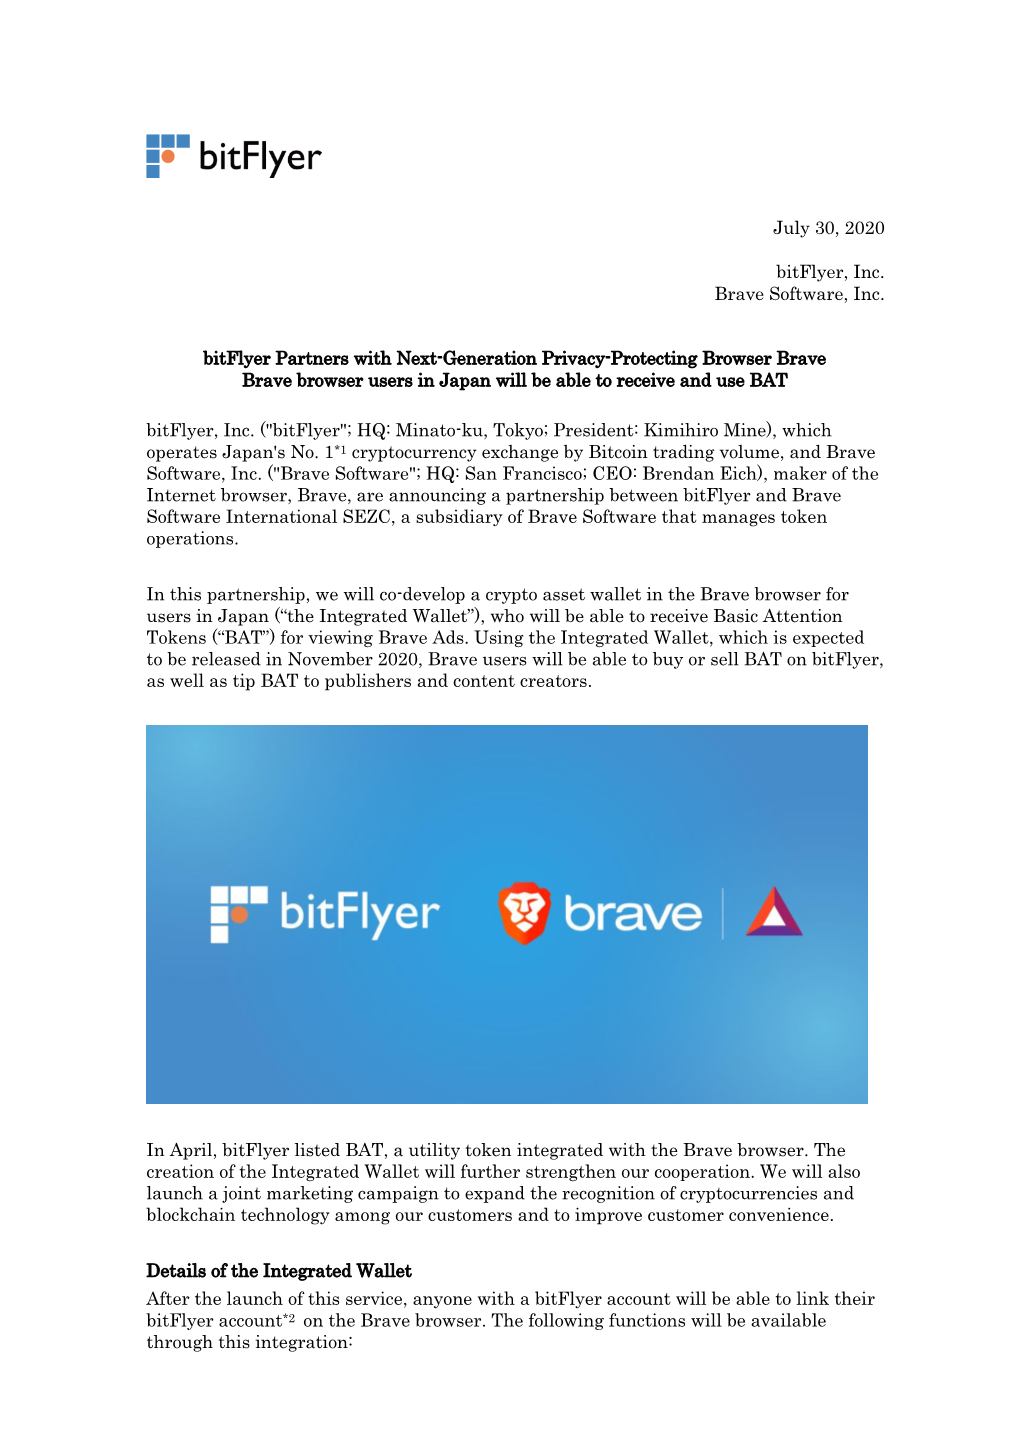 Bitflyer Partners with Next-Generation Privacy-Protecting Browser Brave Brave Browser Users in Japan Will Be Able to Receive and Use BAT Bitflyer, Inc